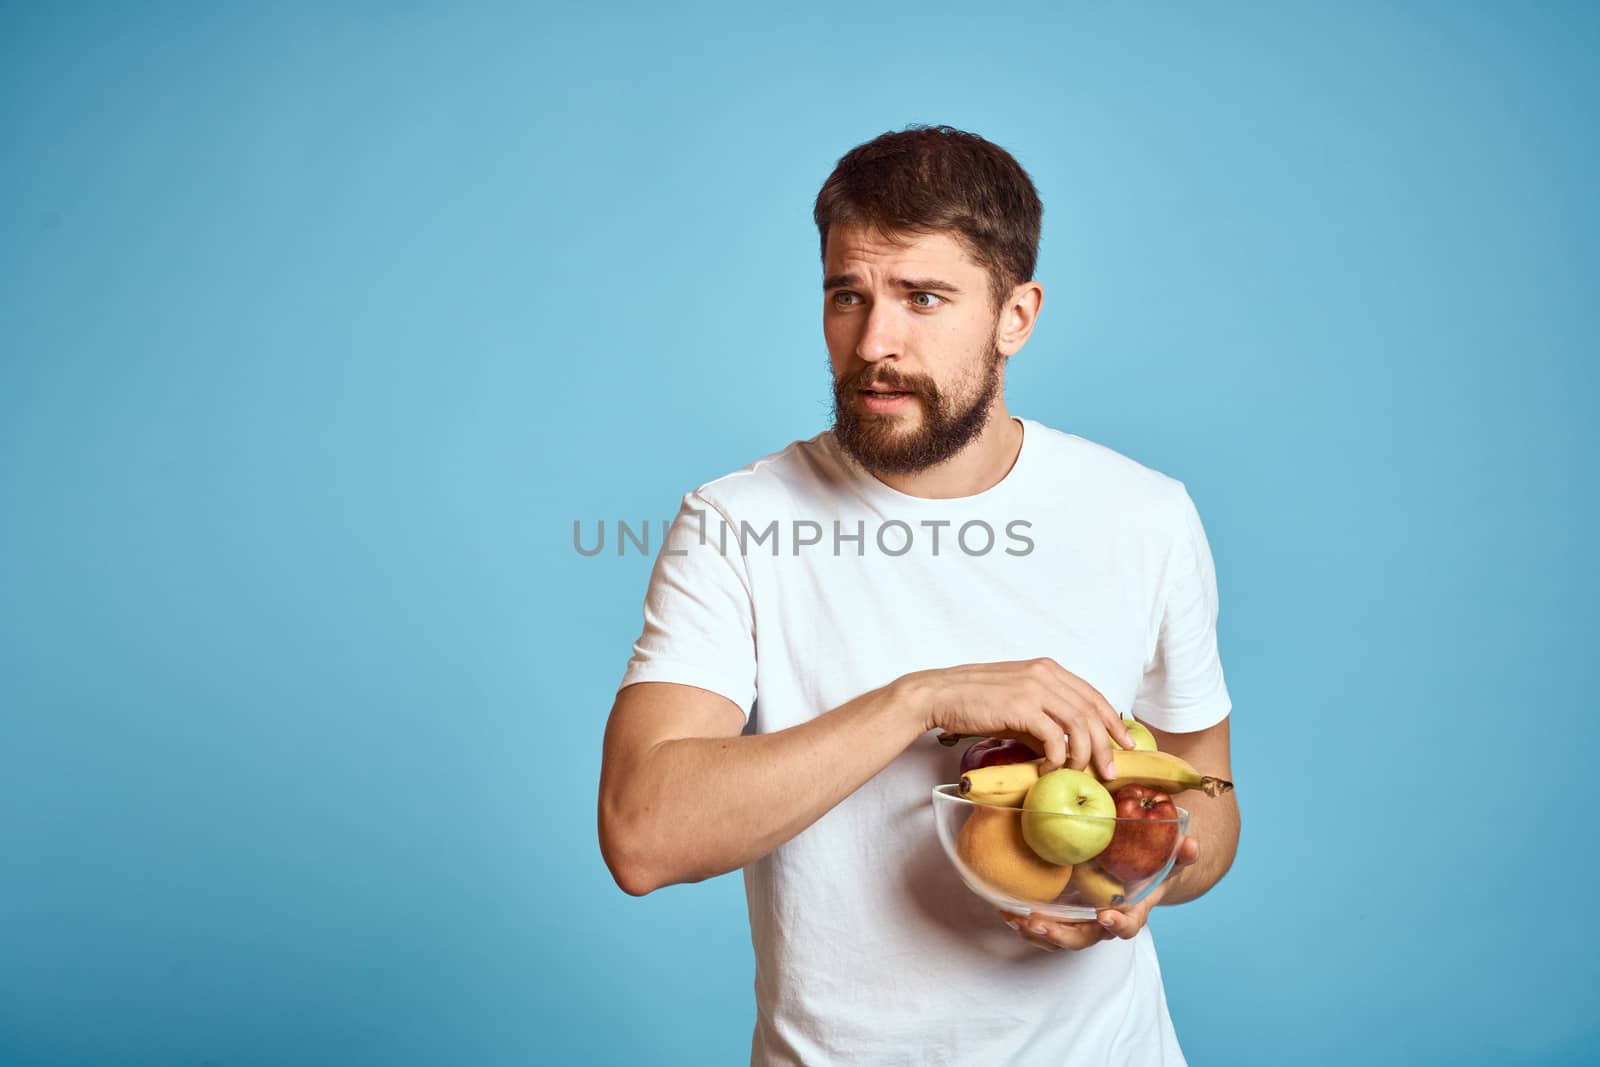 dark background handsome man with a beard holding fresh fruit and lifestyle transparent cup by SHOTPRIME